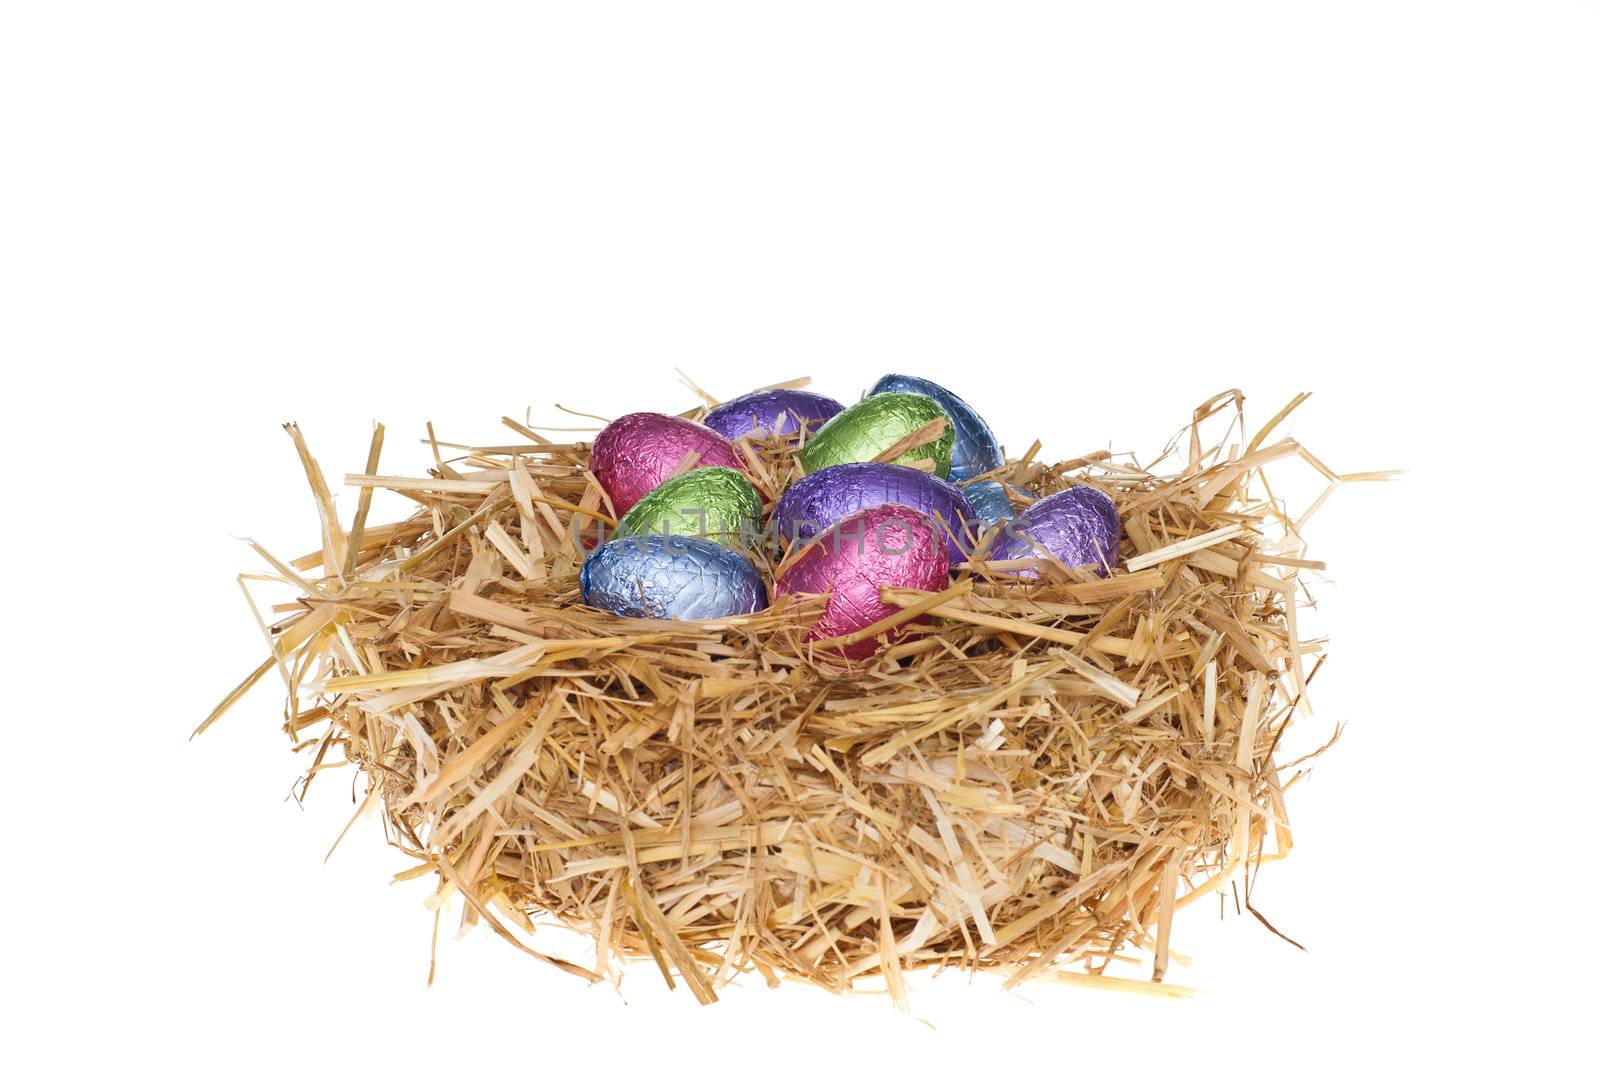 Straw nest with chocolate Easter eggs by 3523Studio